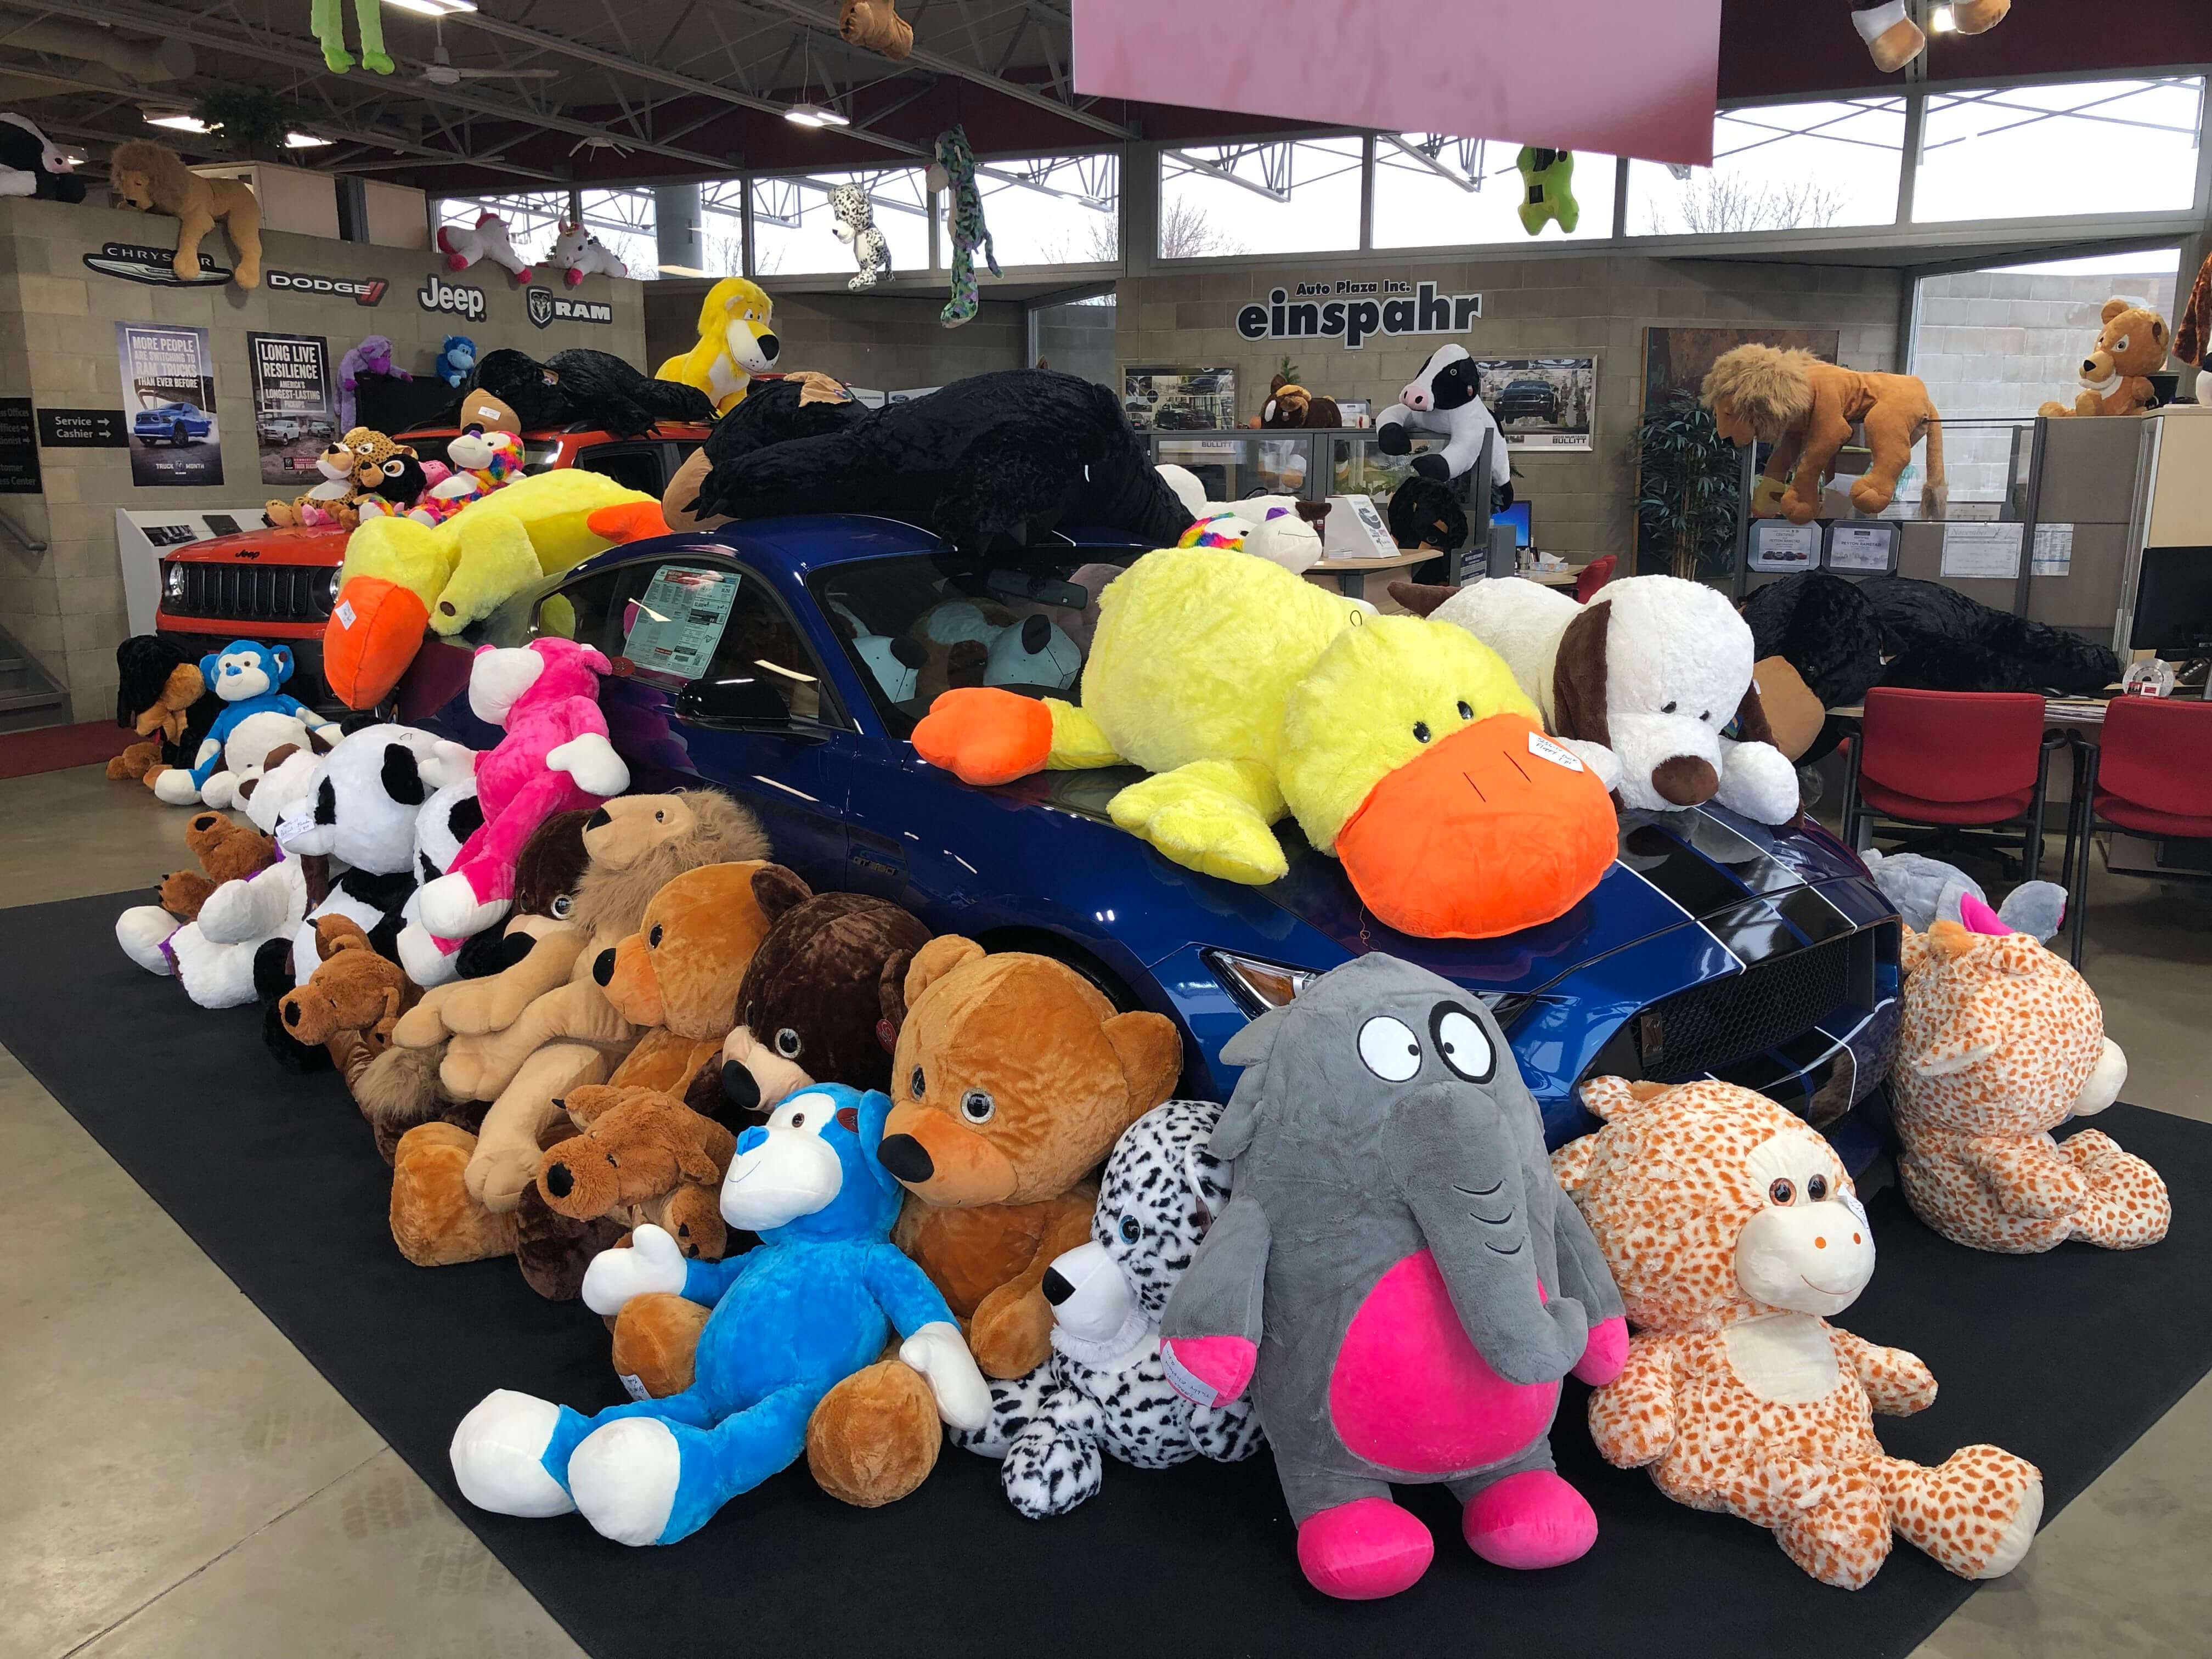 Stuffed animals in Brookings for those who purchase with Einspahr